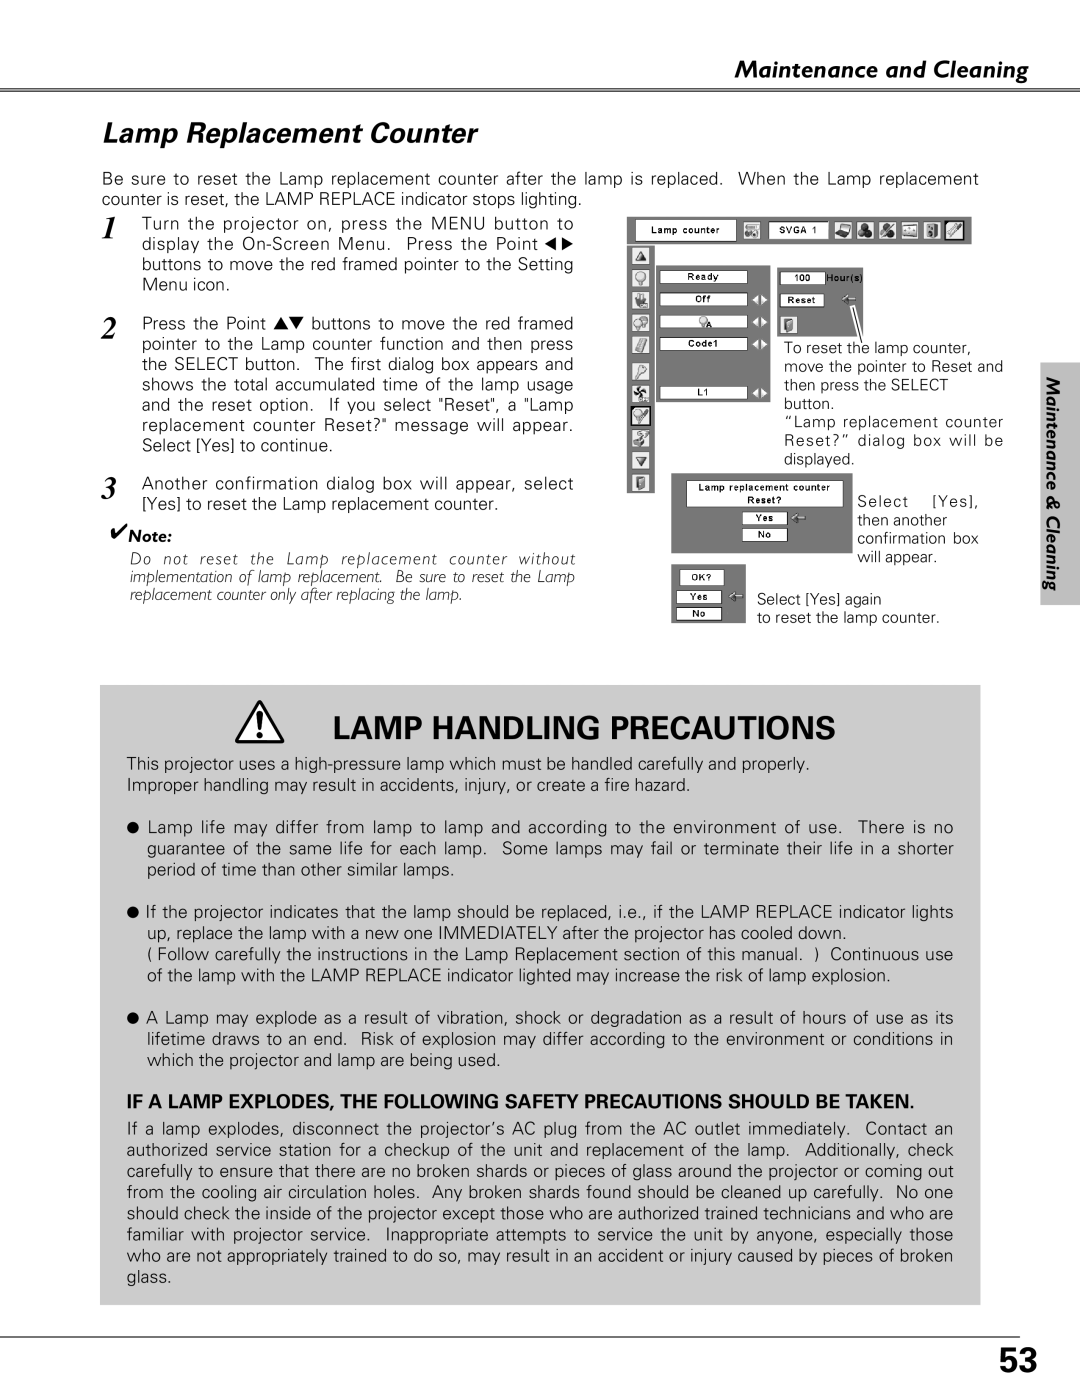 Eiki LC-XB23 Lamp Replacement Counter, Lamp Handling Precautions, Maintenance and Cleaning, Maintenance & Cleaning 